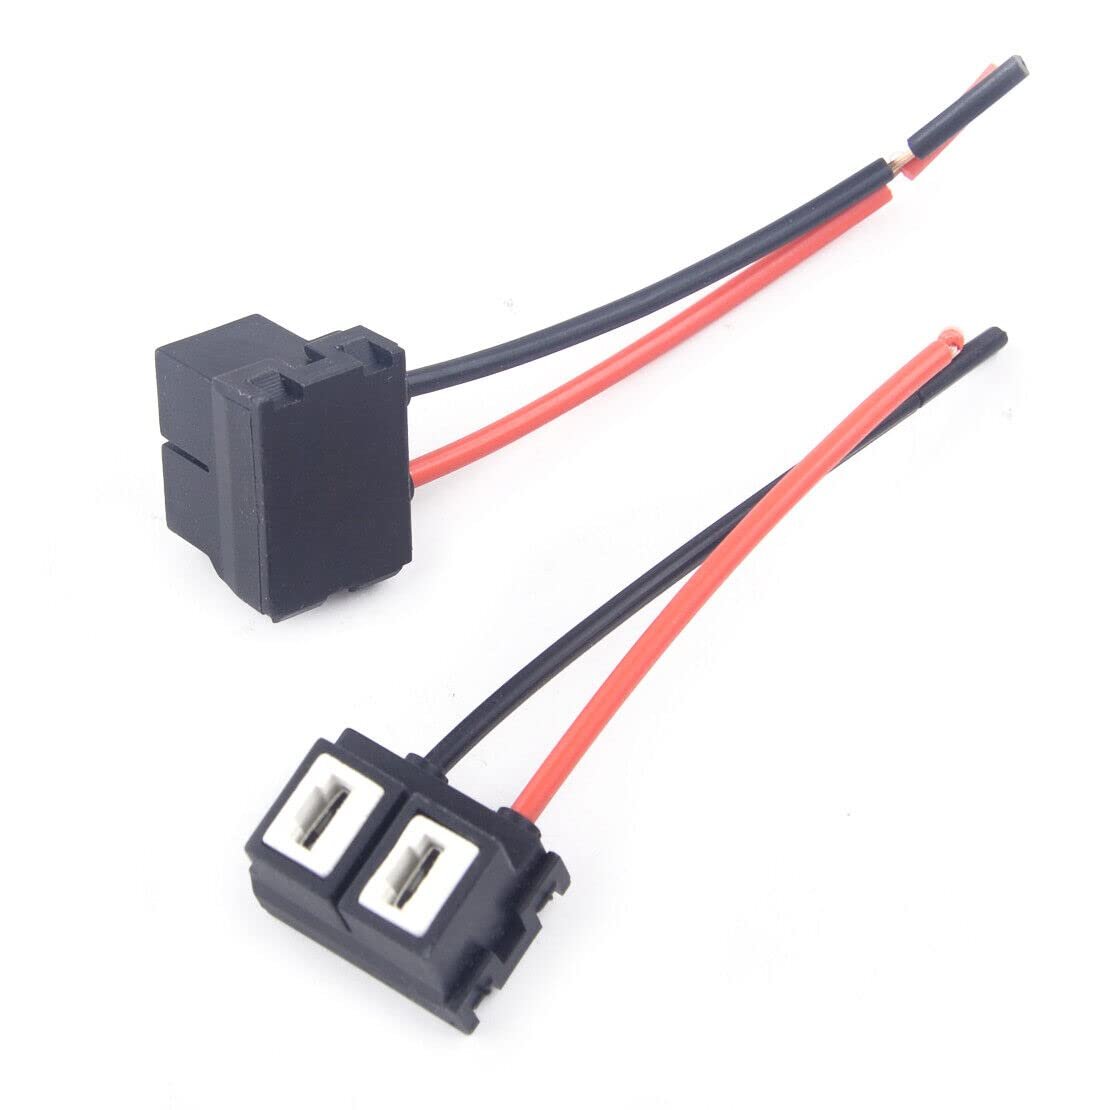 Wiring Holder Female Adapter For H7 Cable Socket For Headlight (Pack of 2) Wiring Holder Image 